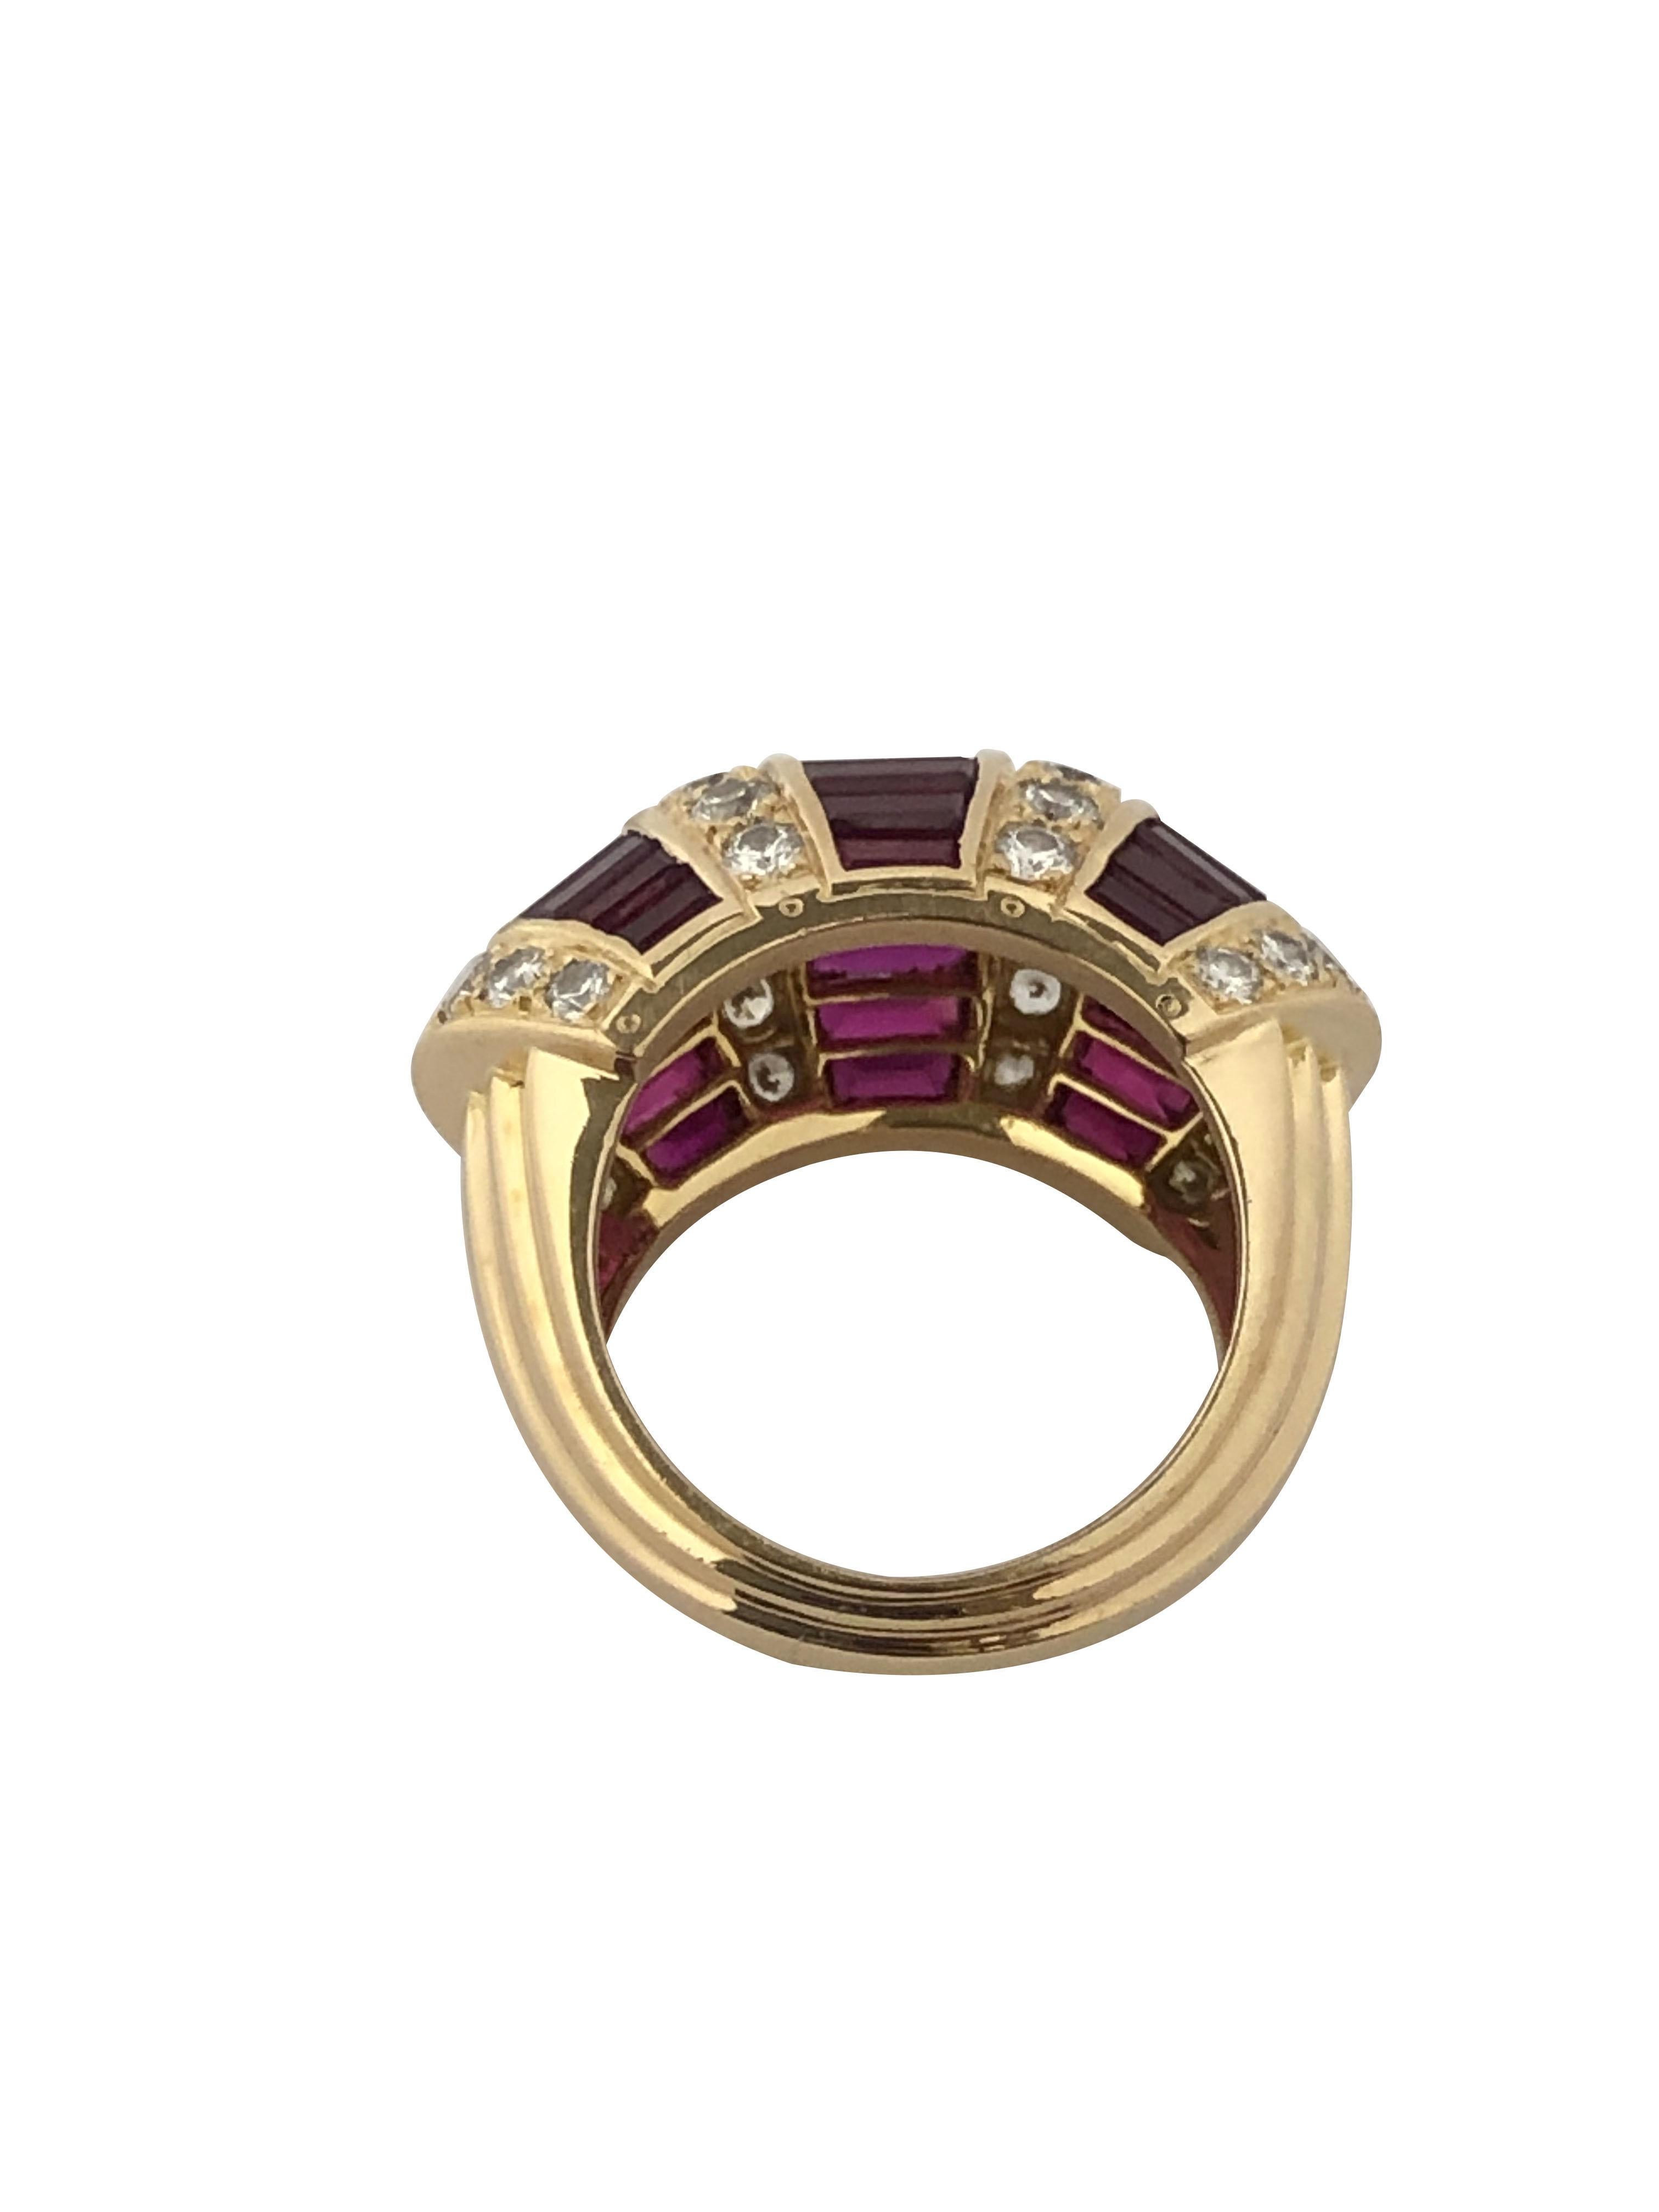 Oscar Heyman Large Yellow Gold Ruby and Diamond Cocktail Ring In Excellent Condition For Sale In Chicago, IL